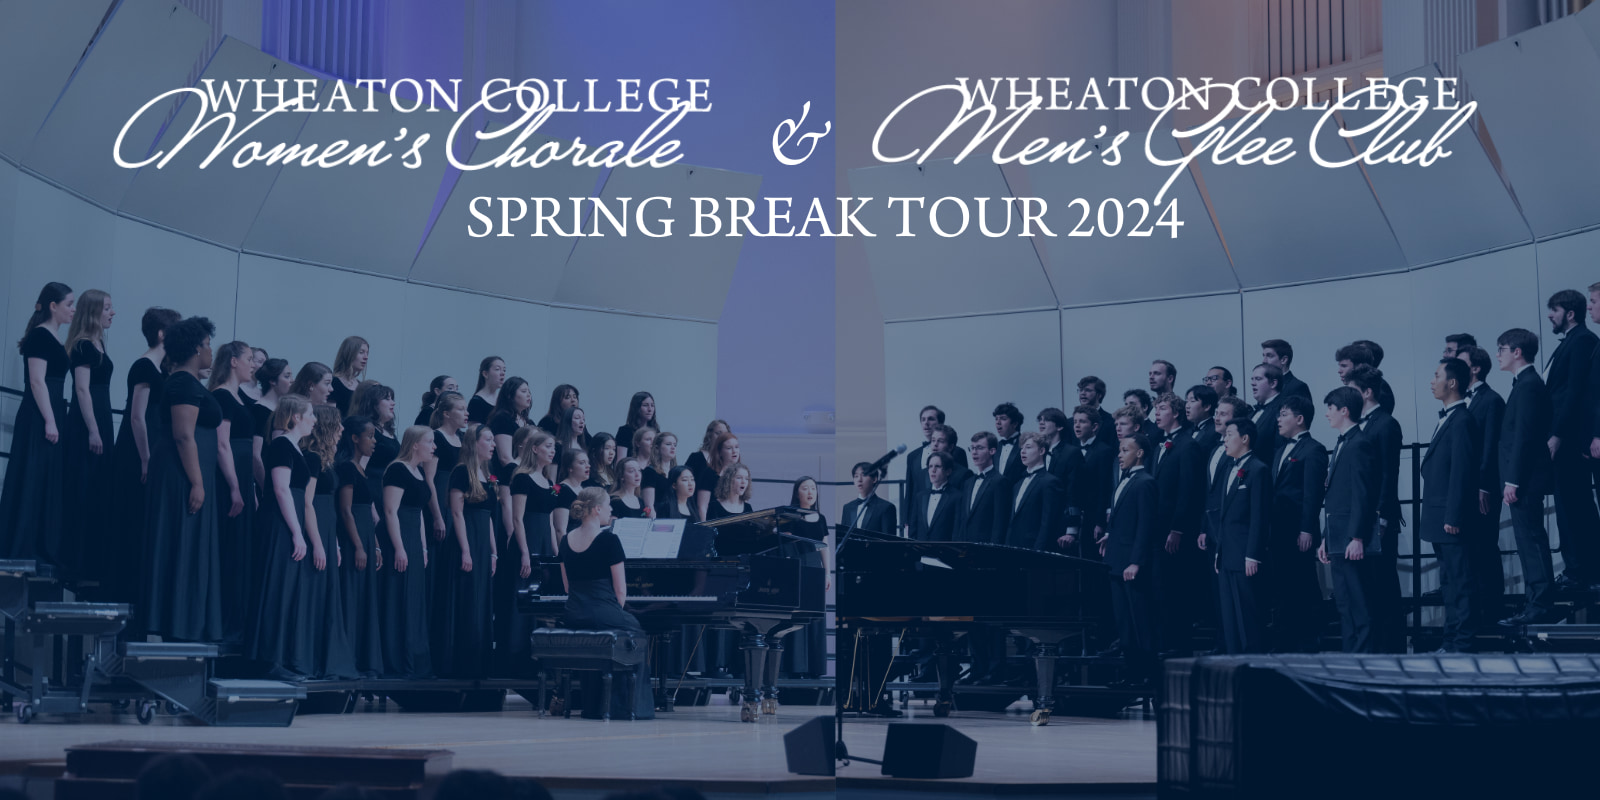 The Wheaton College Men’s Glee Club and Women’s Chorale Singing